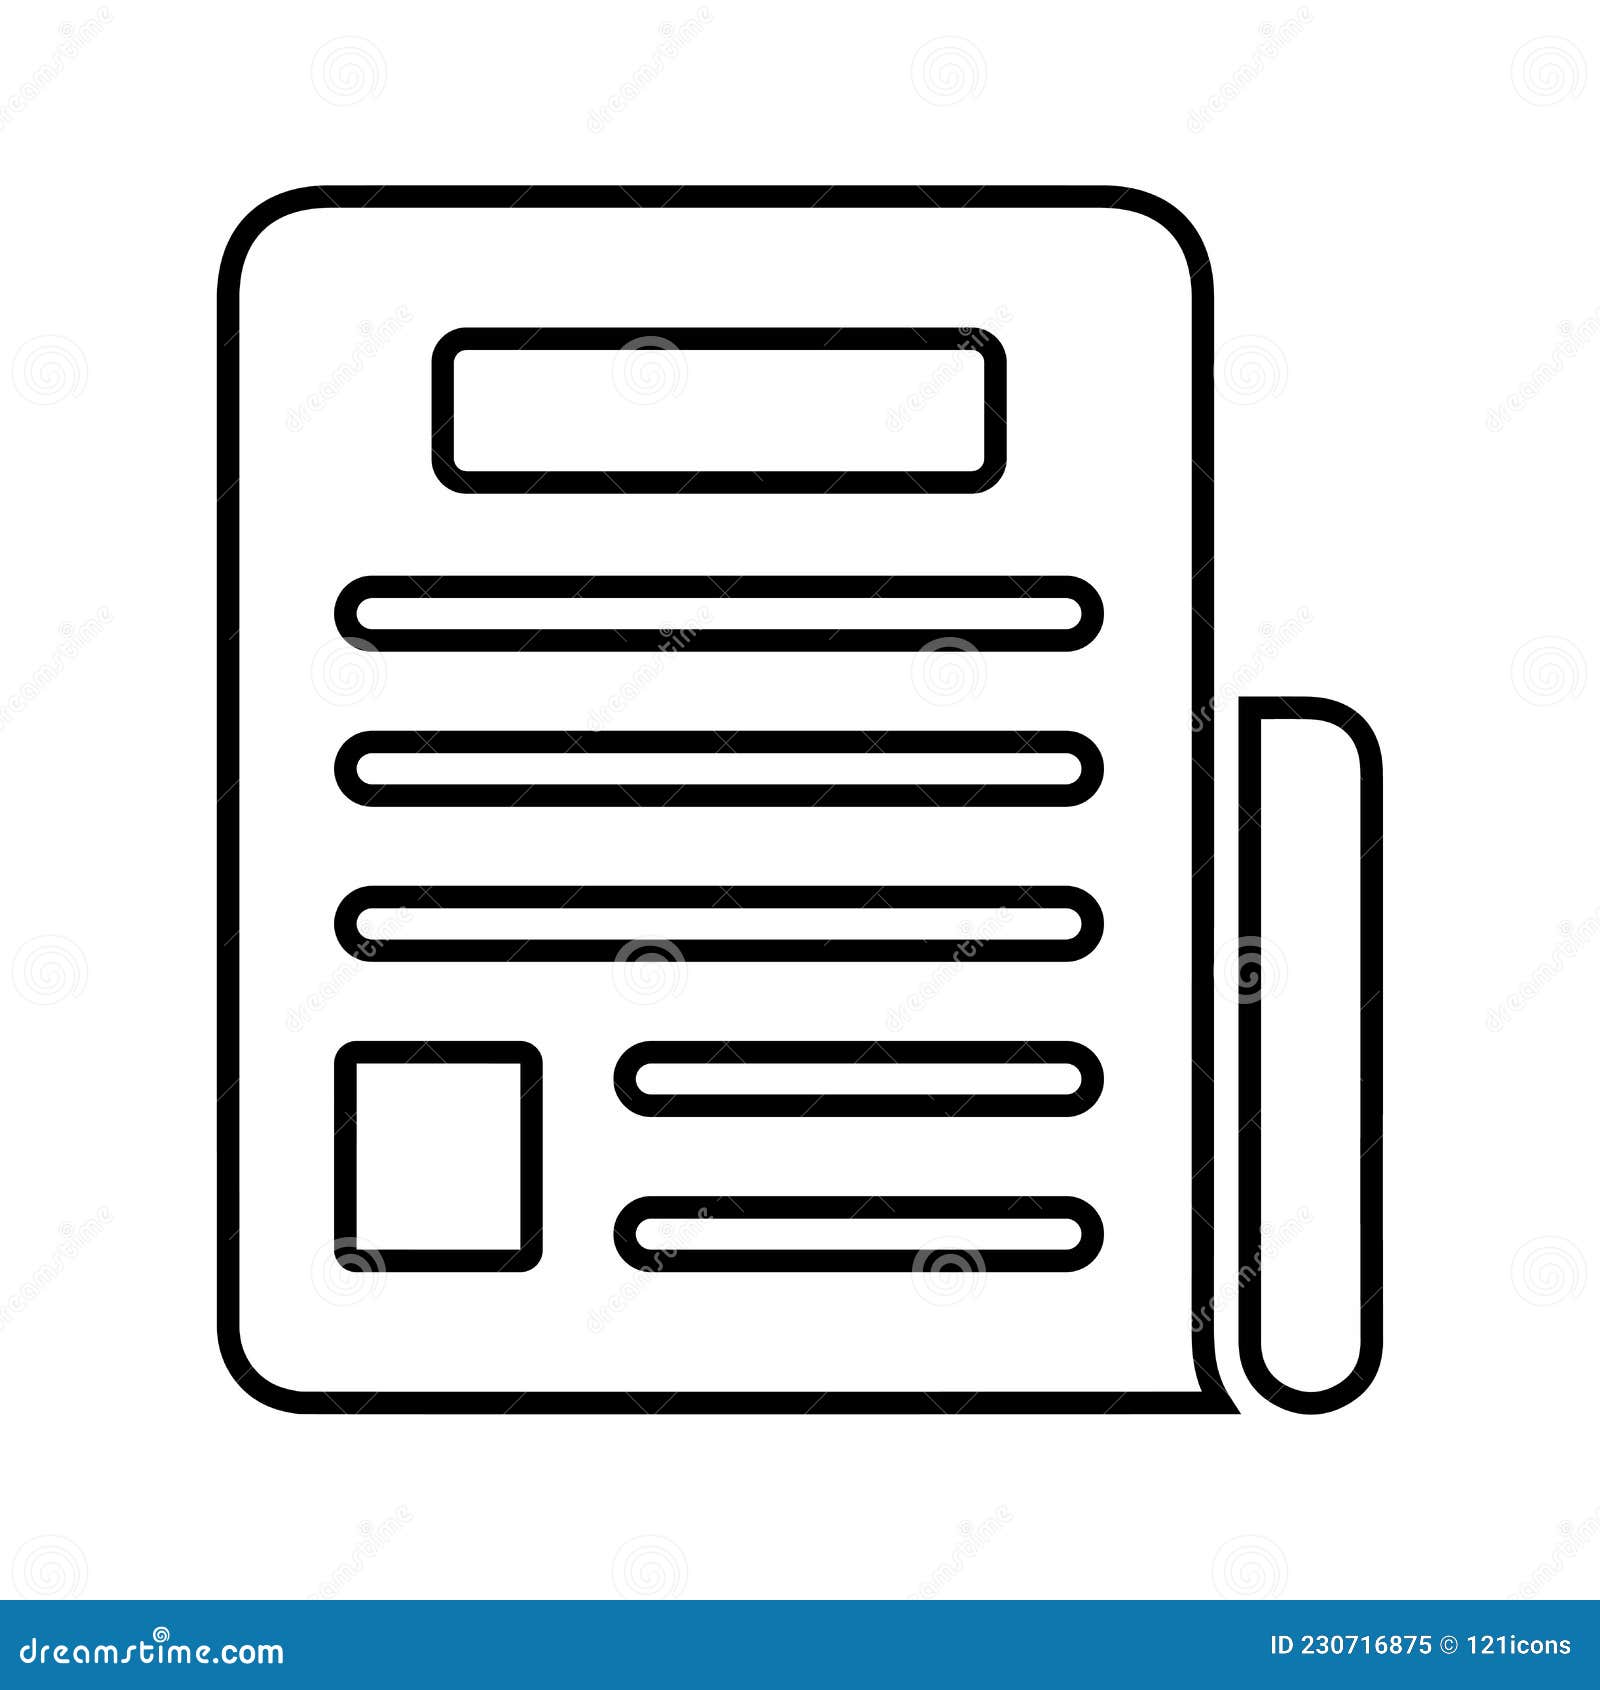 Newspaper, Article Outline Icon. Line Art Vector Stock Vector